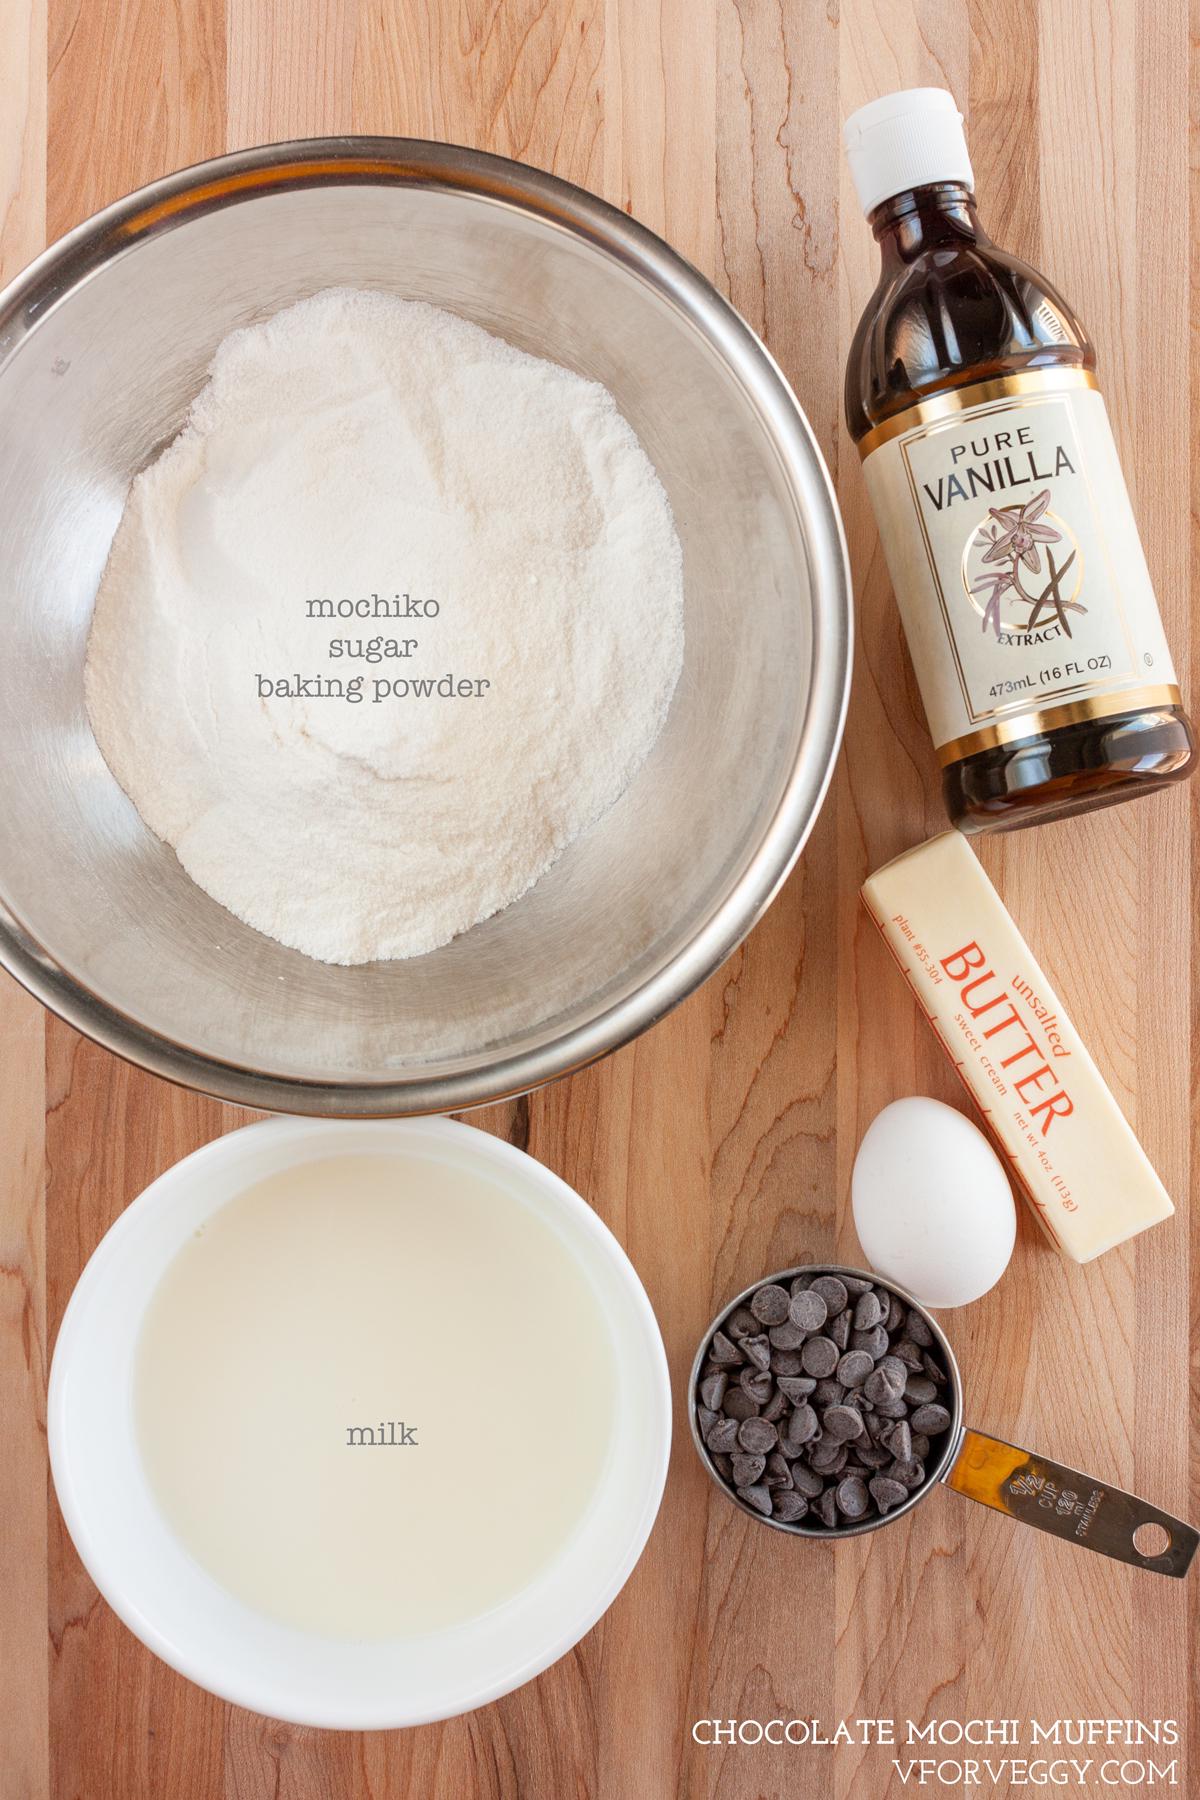 Ingredients for chocolate mochi muffins: mochiko, sugar, baking soda, evaporated milk, chocolate chips, unsalted butter, egg, and vanilla.